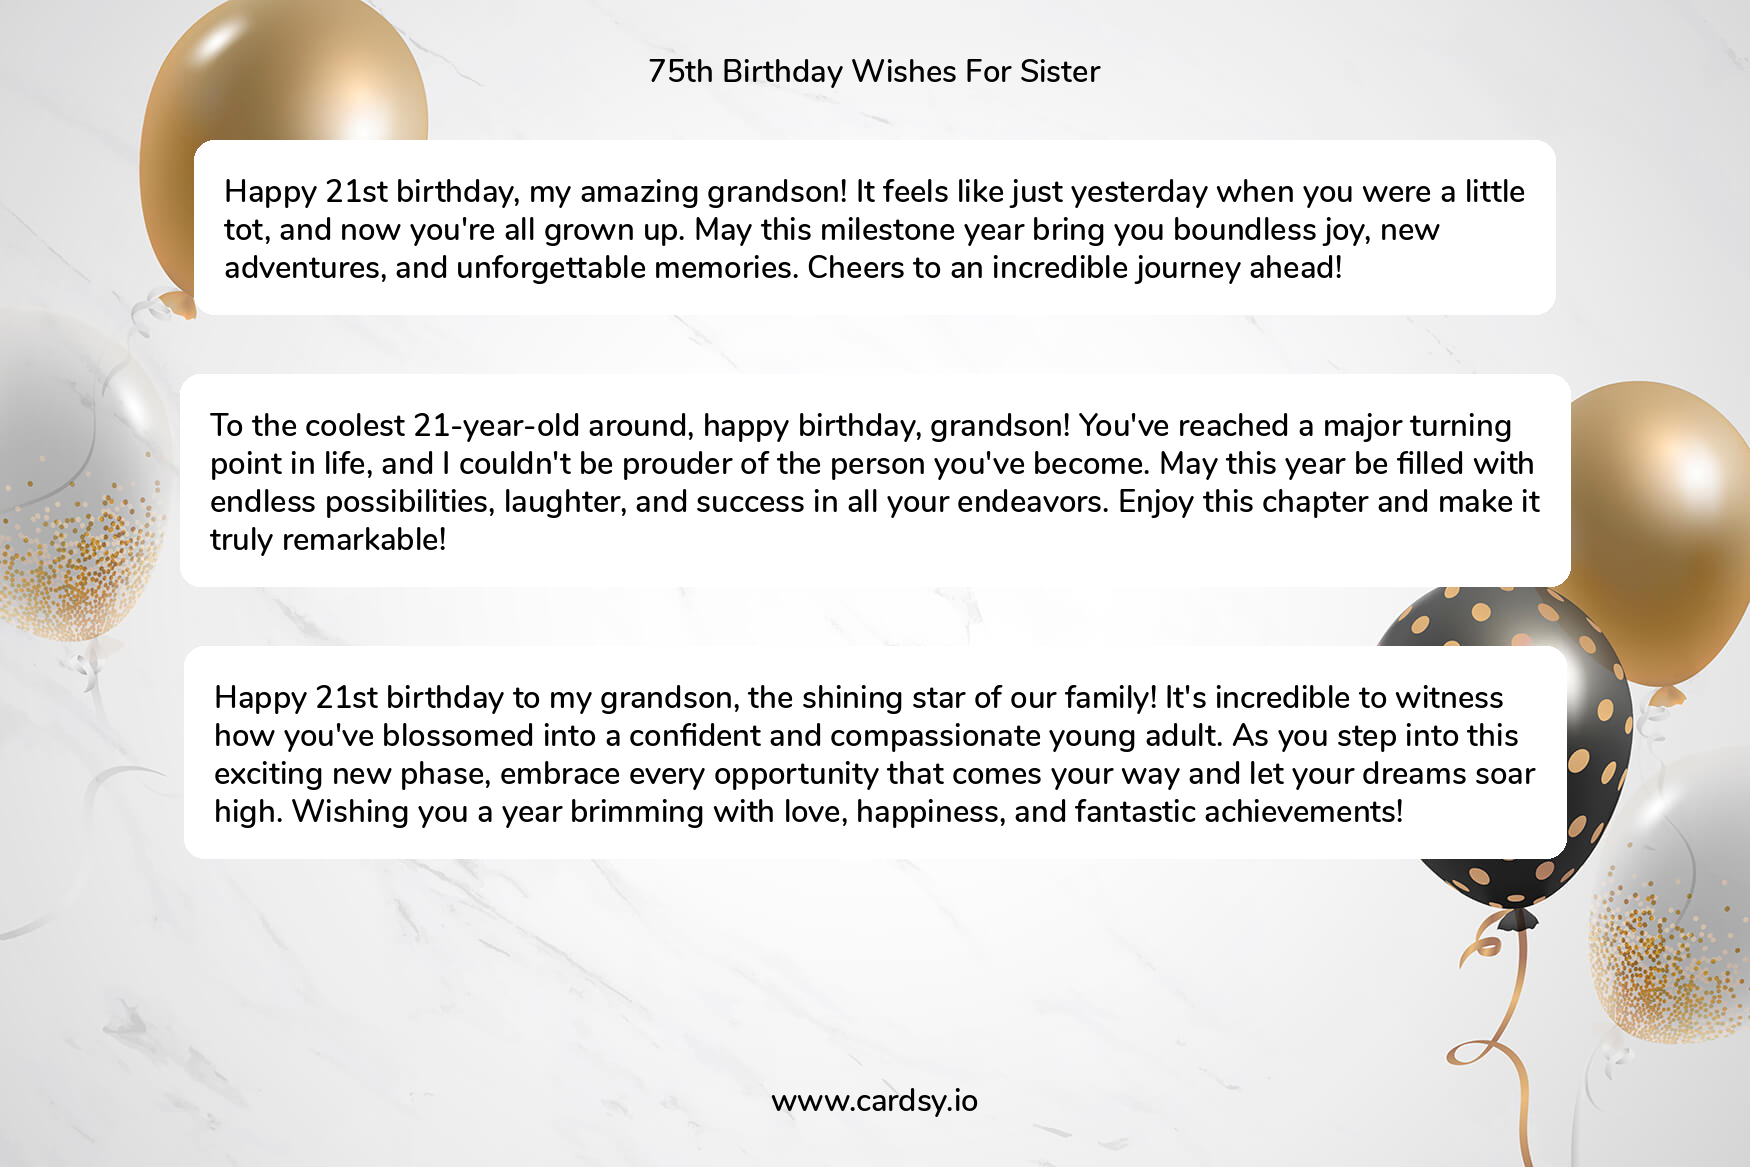 Happy 75th Birthday Sayings for Sister